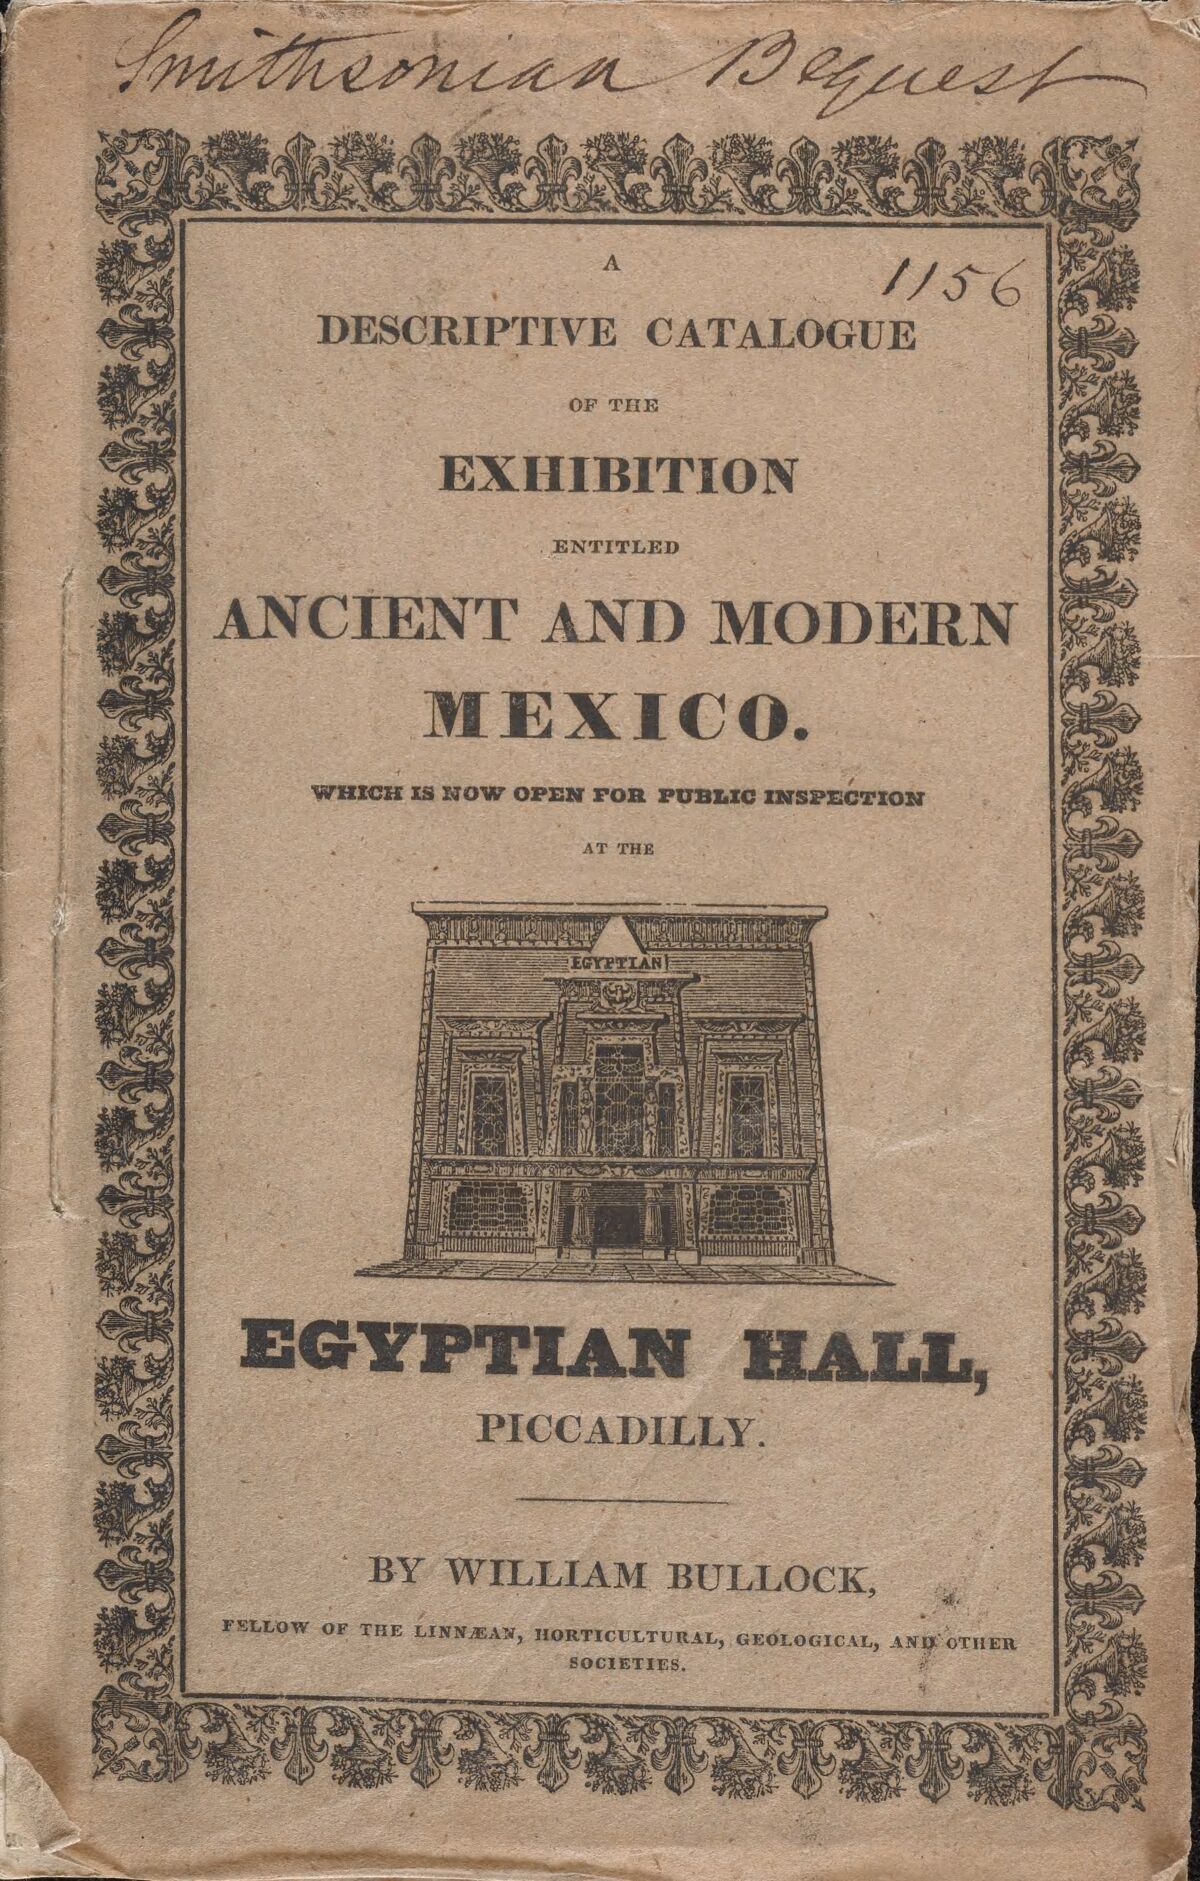 GFD 3/259: “A descriptive catalogue of the exhibition, entitled Ancient and Modern Mexico” (by William Bullock, 1824)